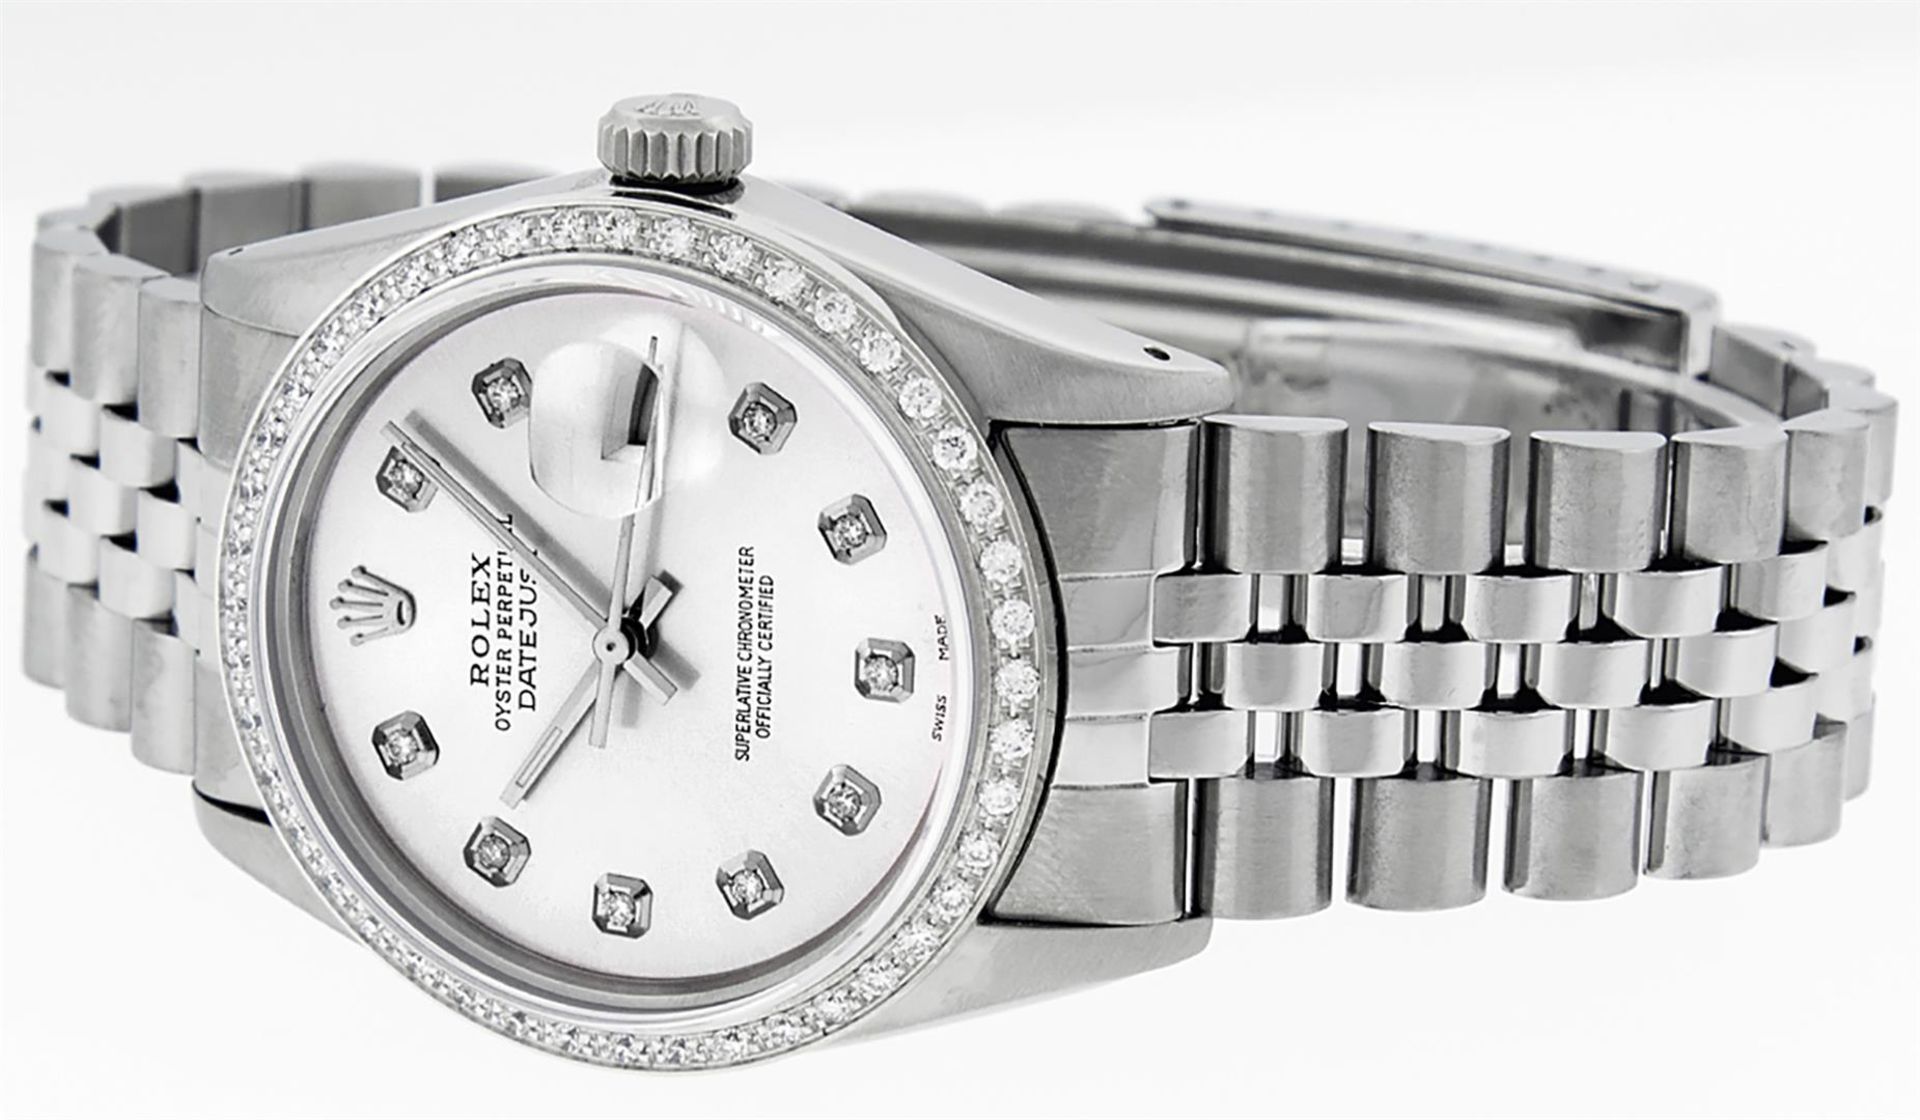 Rolex Mens Datejust 36 Stainless Steel Silver Diamond Oyster Datejust Wristwatch - Image 9 of 9